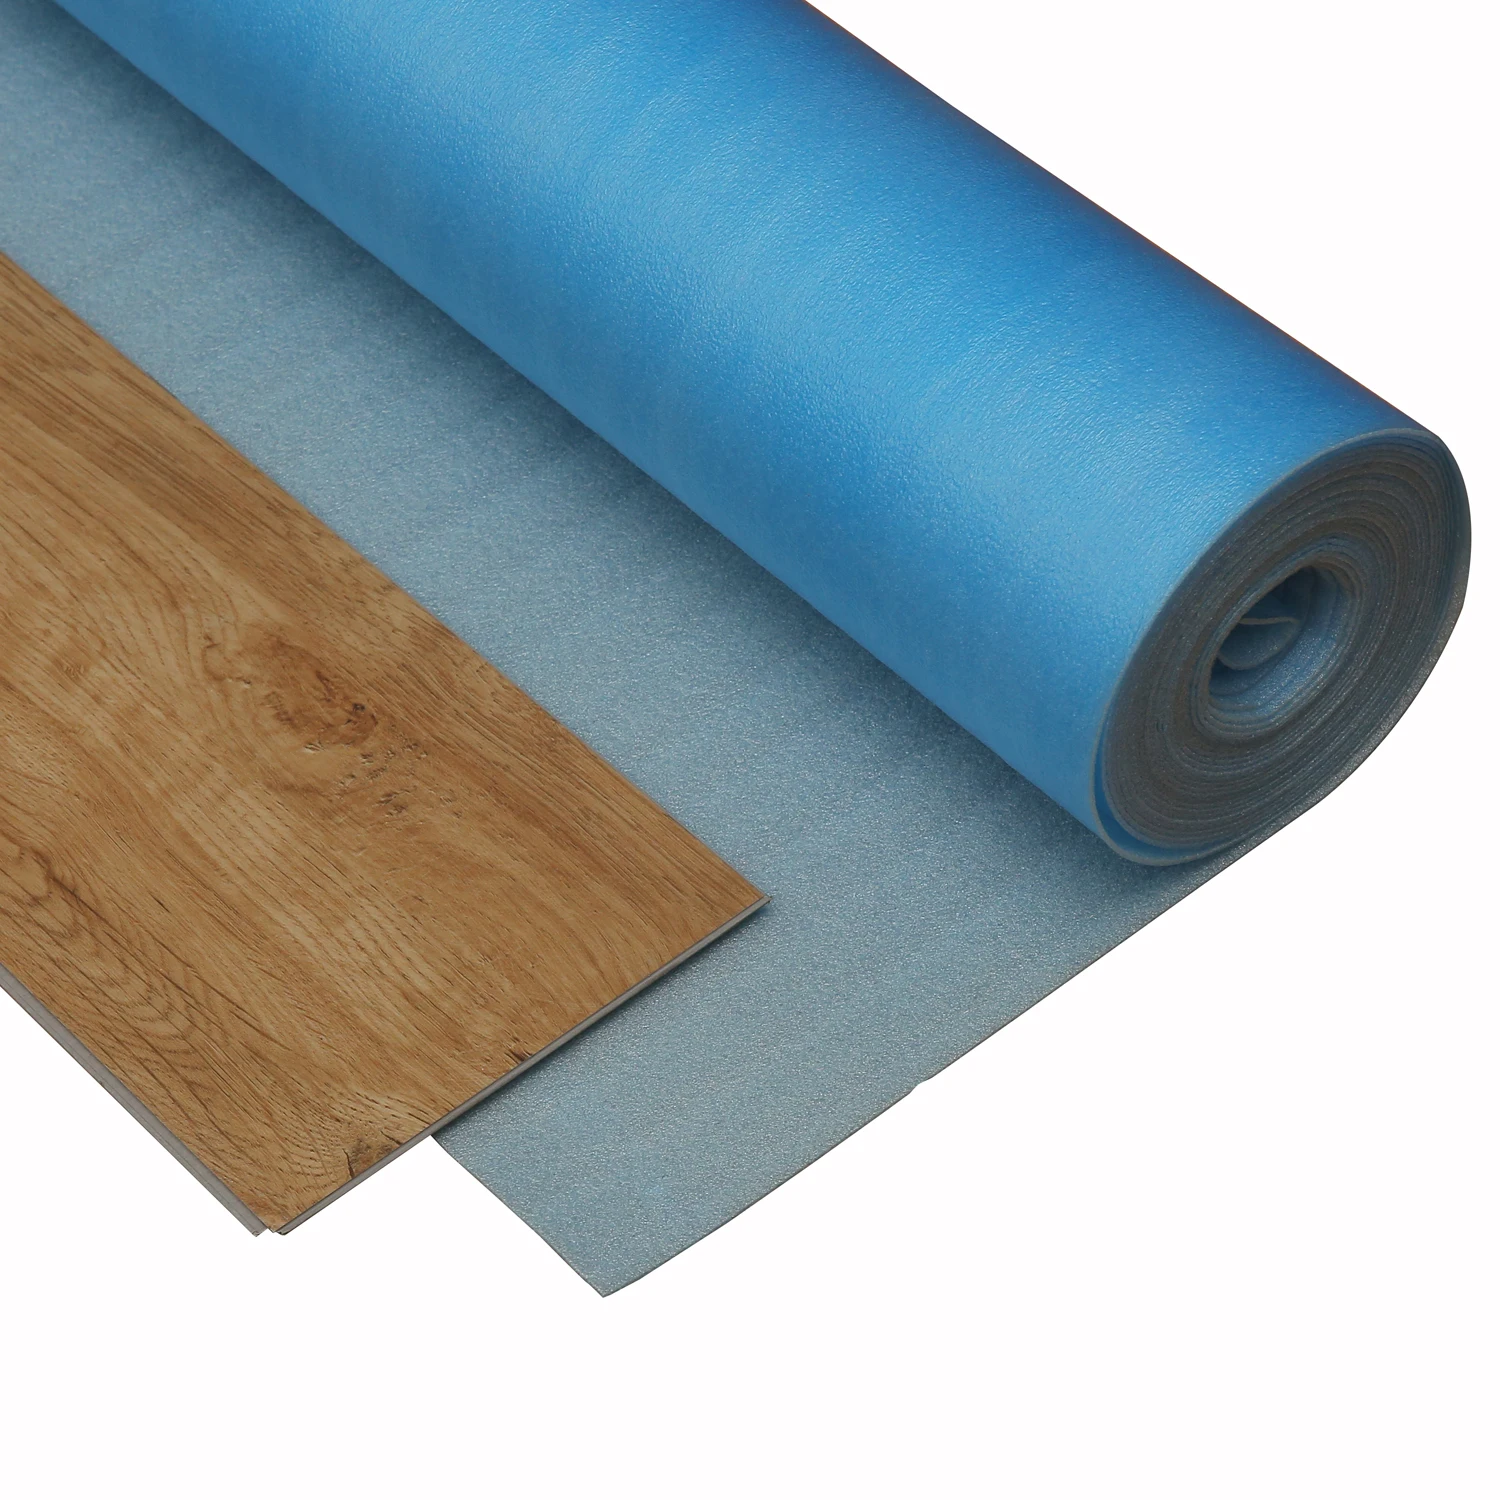 Moisture Proof Epe Foam With Blue Pe Film Underlayment For